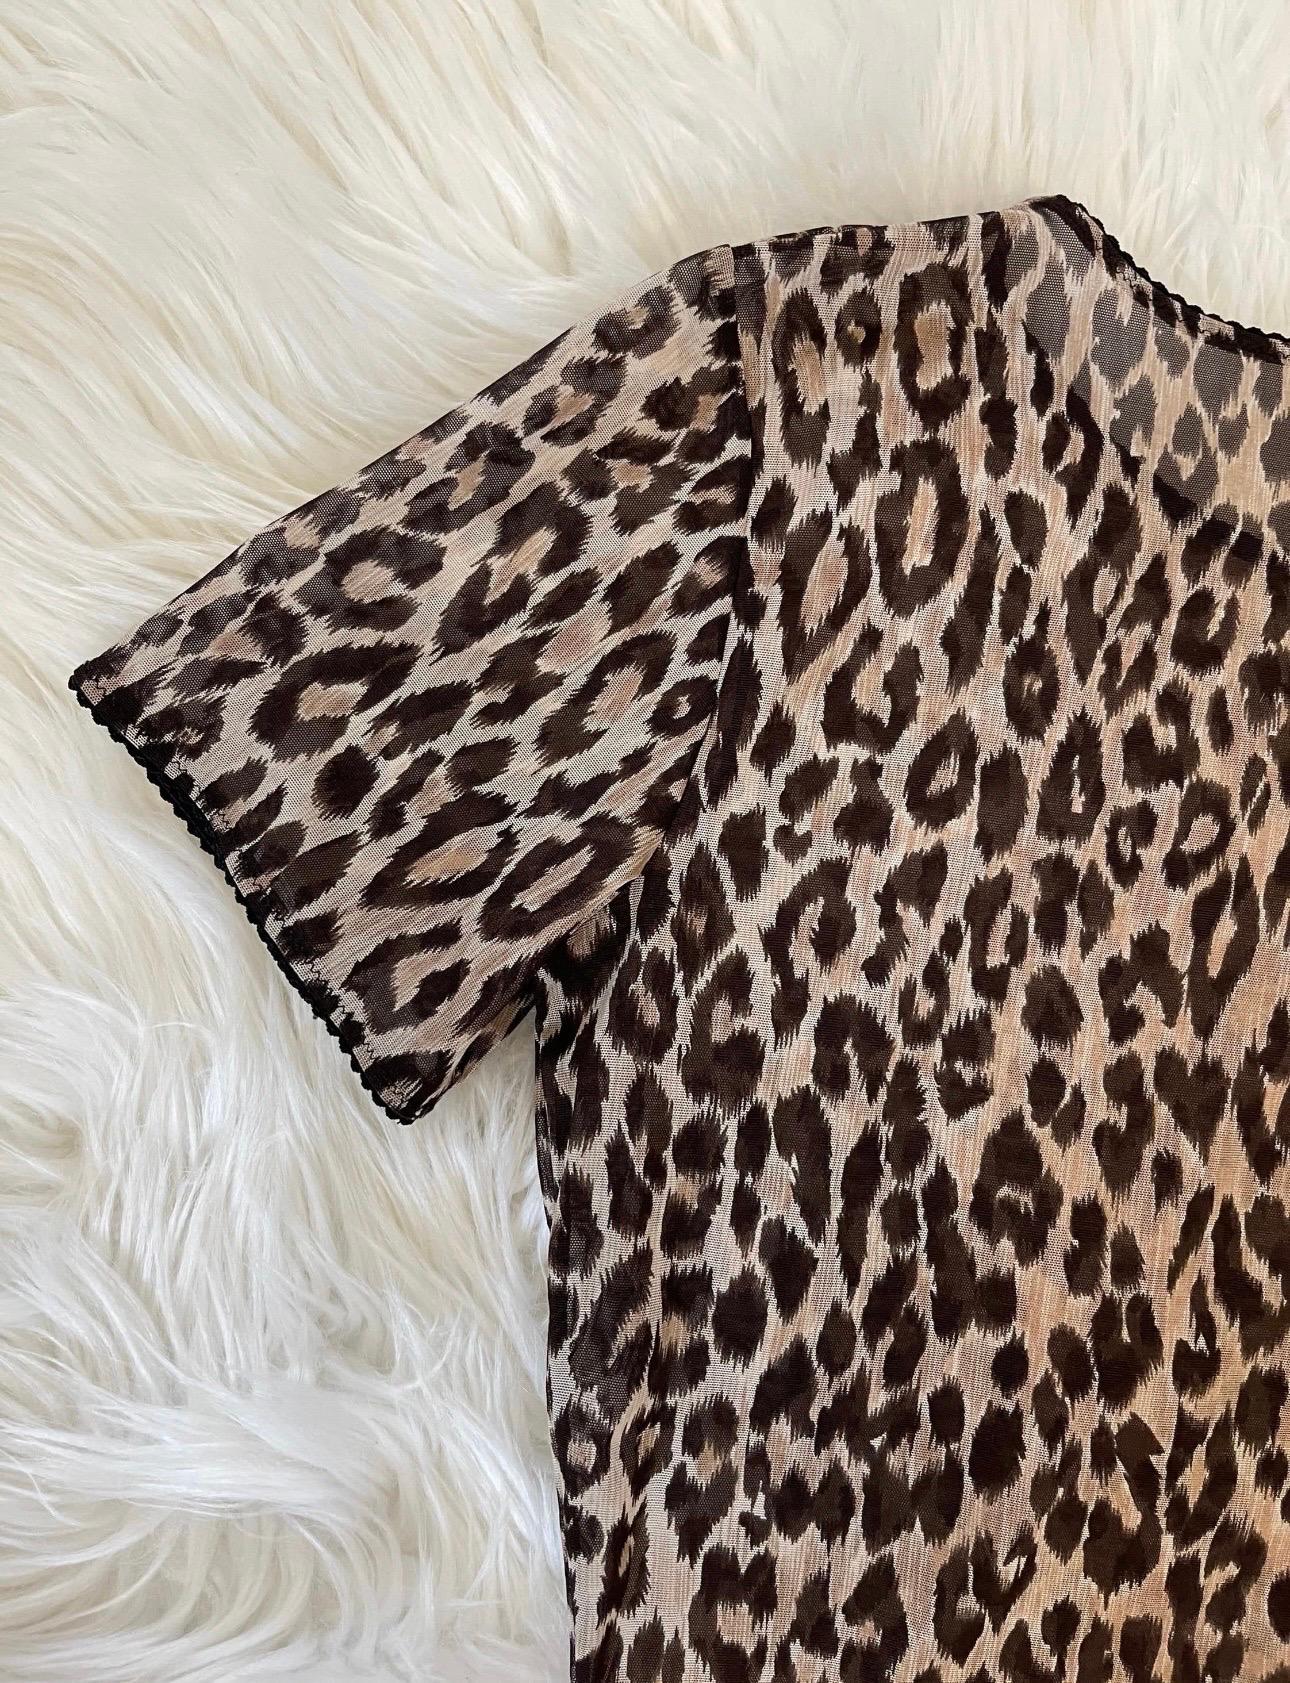 Vintage Dolce & Gabbana Sheer Cheetah Print Ruffle Lace See Through T Shirt Top In Excellent Condition For Sale In Malibu, CA